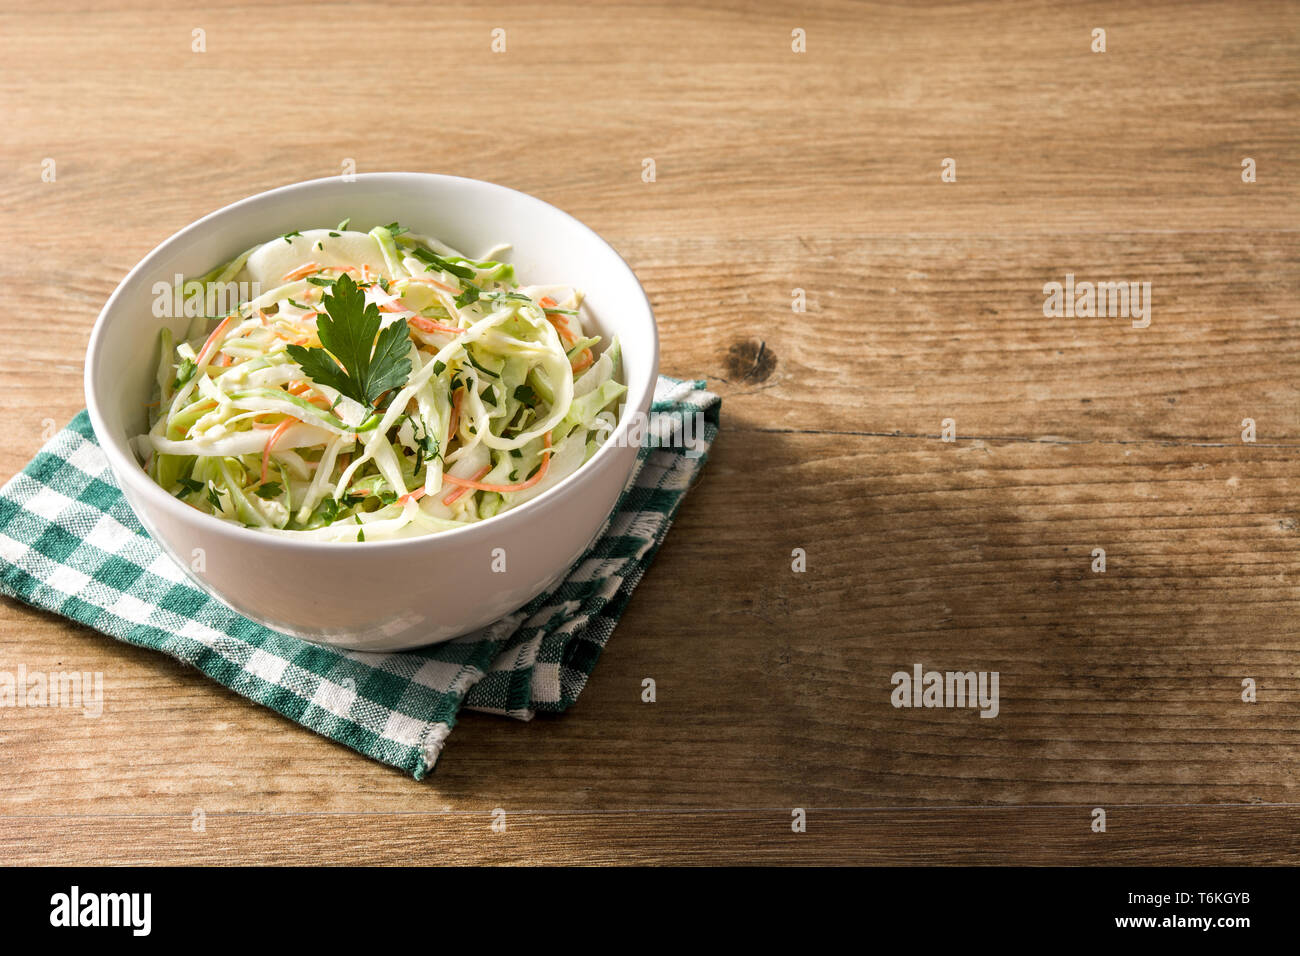 Coleslaw salad in white bowl on wooden table Stock Photo